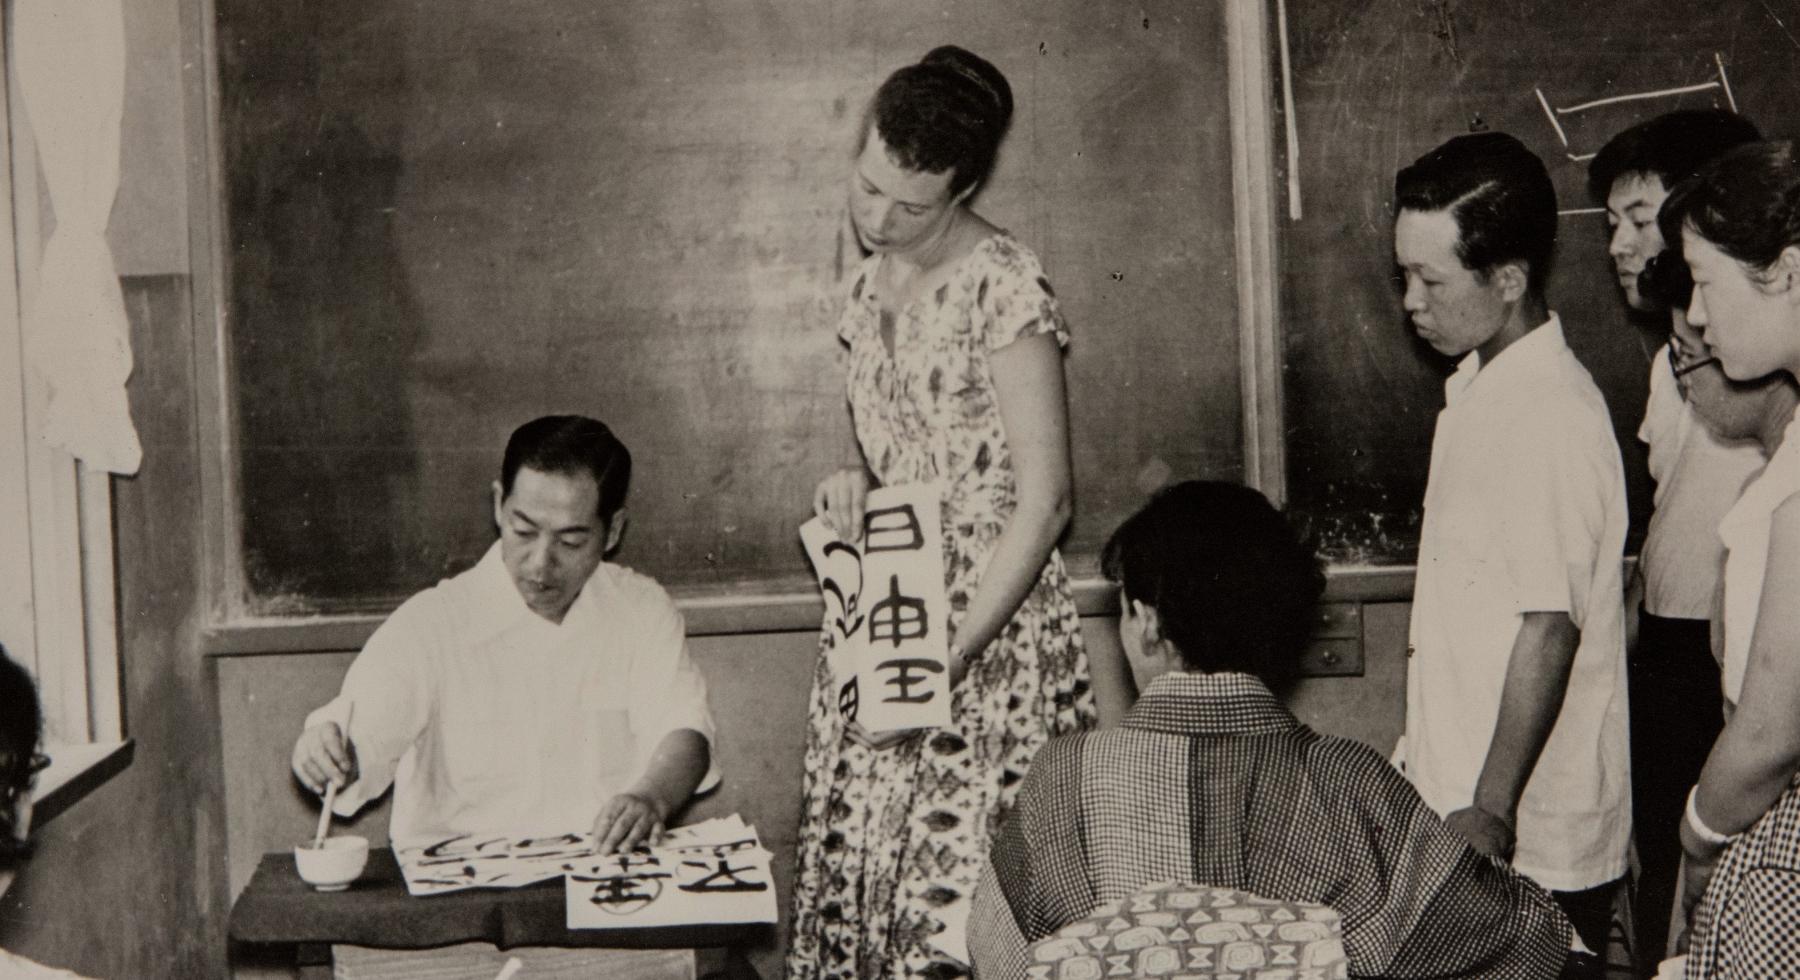 Deborah Remington taught calligraphy to Japanese and American students at the San Francisco Art Institute, soon after her return to the U.S. from Japan. Photo dated Fall 1958.